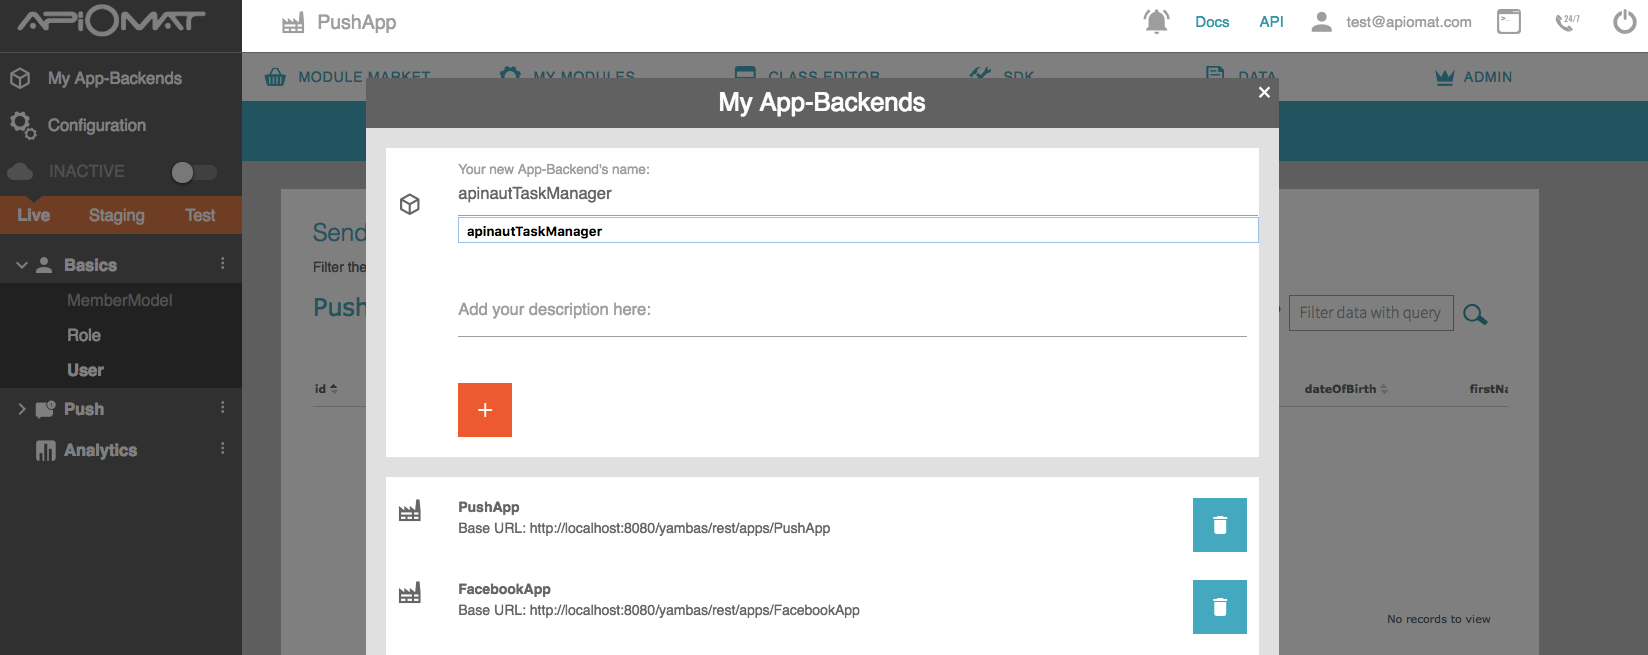 images/download/attachments/12648956/taskManager_newBackend.png